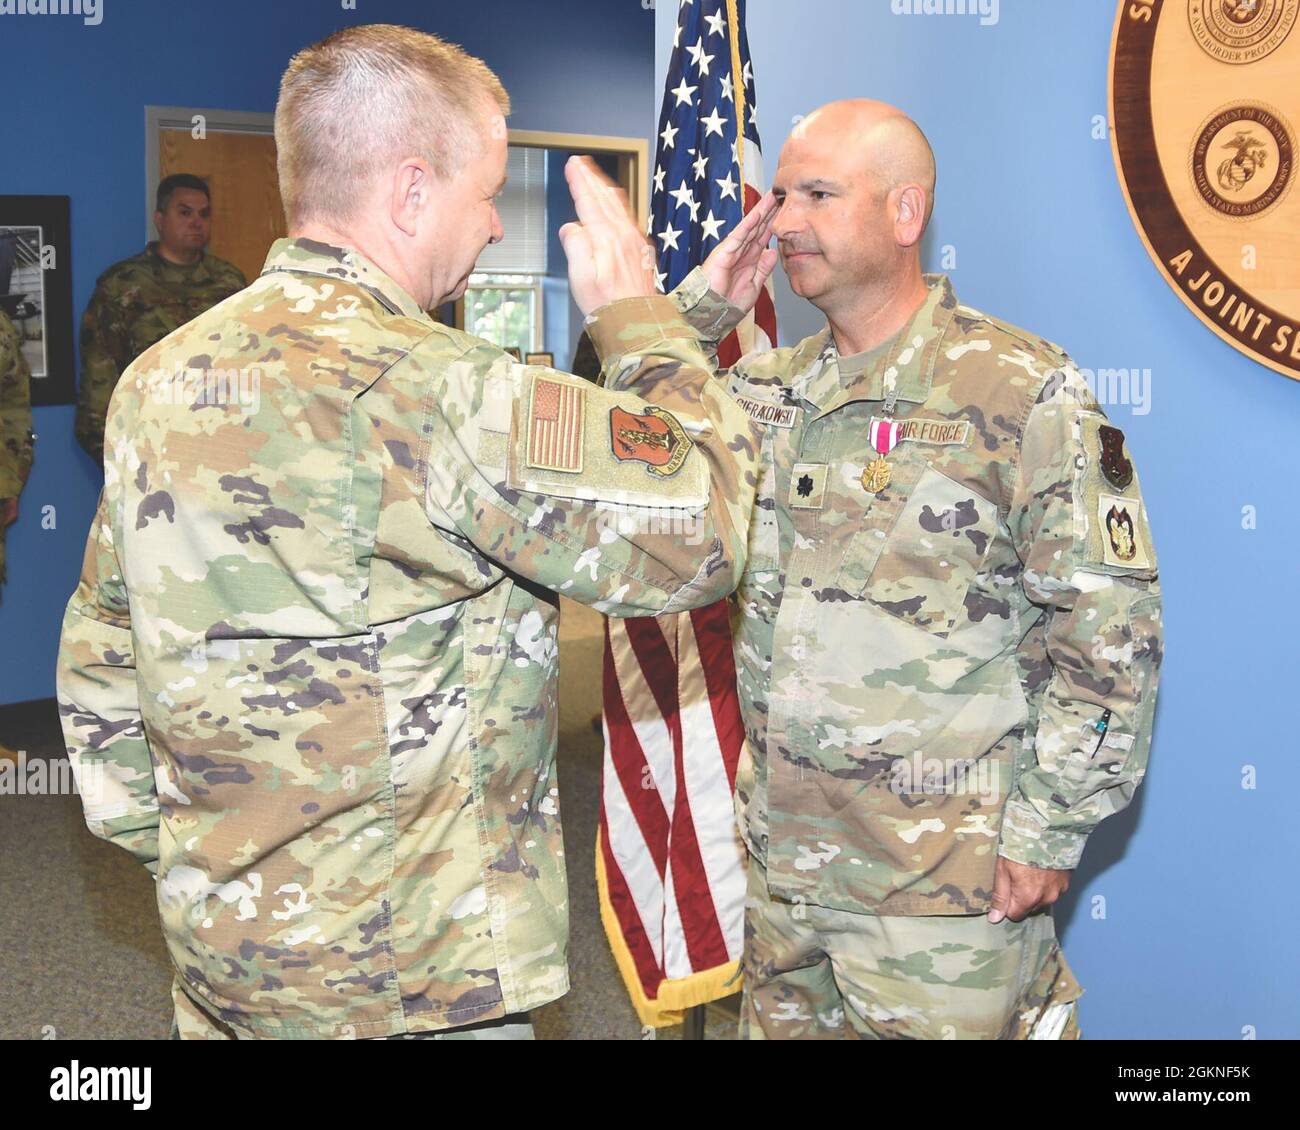 SELFRIDGE AIR NATIONAL GUARD BASE, Mich.— Lt. Col. Thomas Sierakowski, inspector general of the 127th Wing here,  salutes Brig. Gen. Rolf E. Mammen, 127th Wing commander, after receiving the Meritorious Service Medal here, on June 5, 2021. Stock Photo